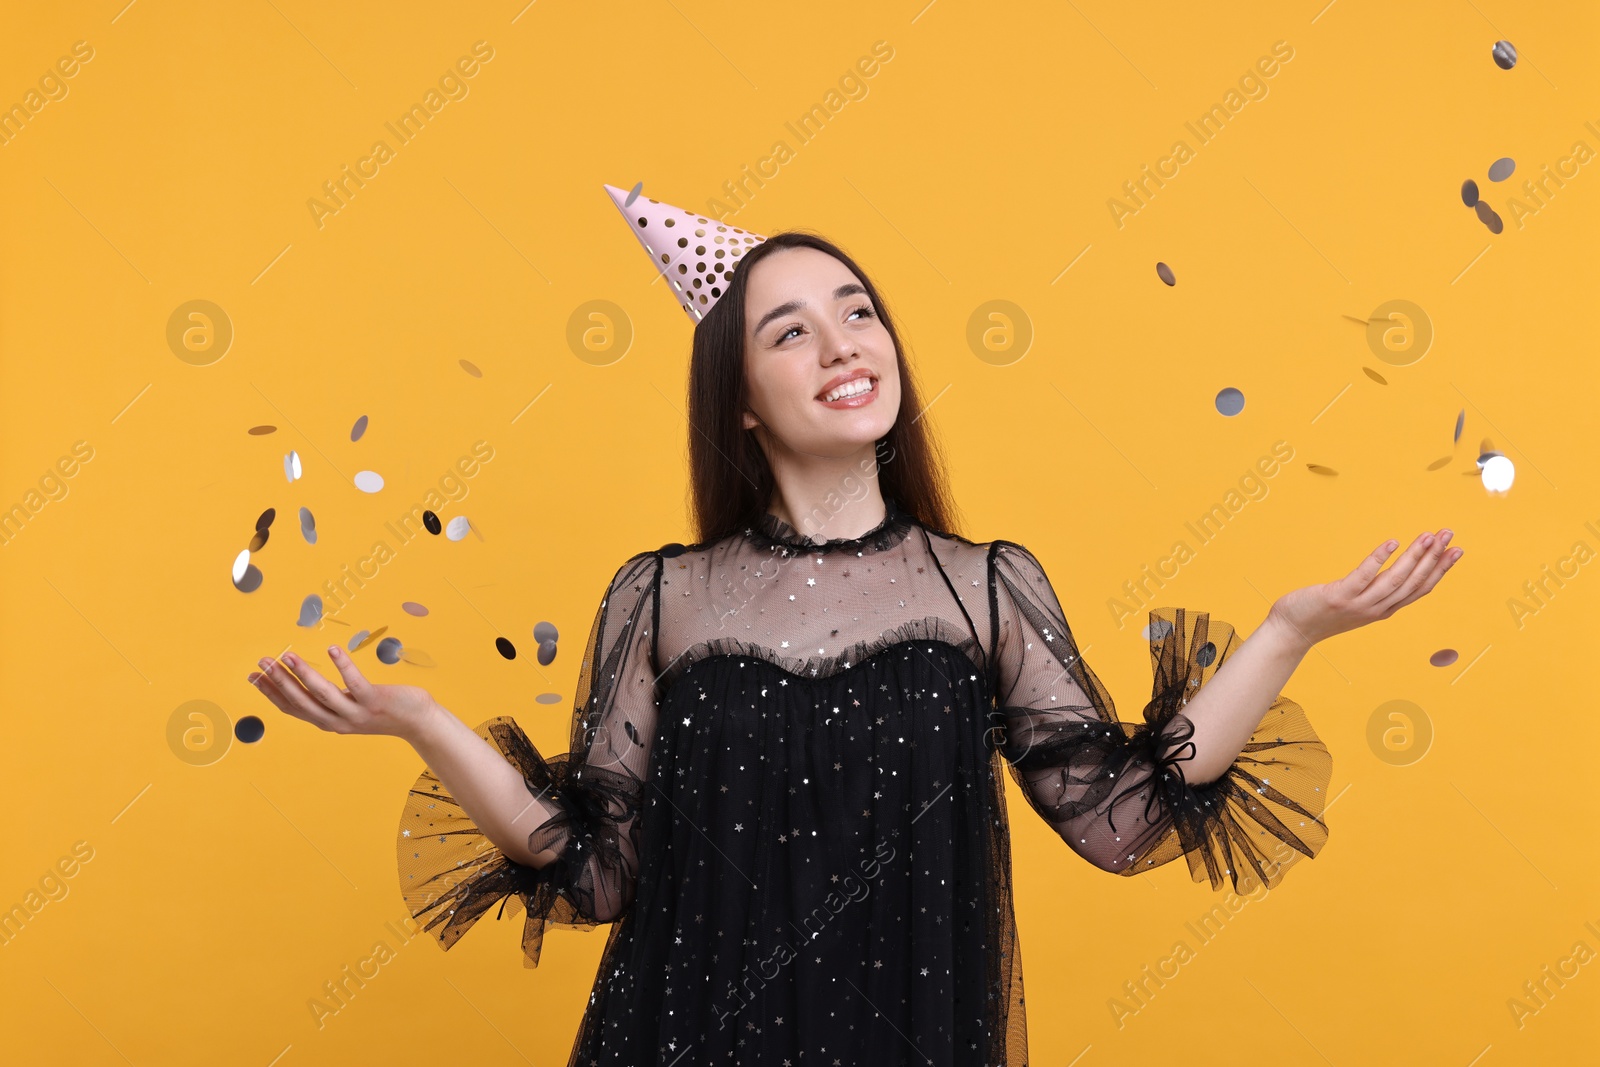 Photo of Happy woman in party hat throwing confetti on orange background